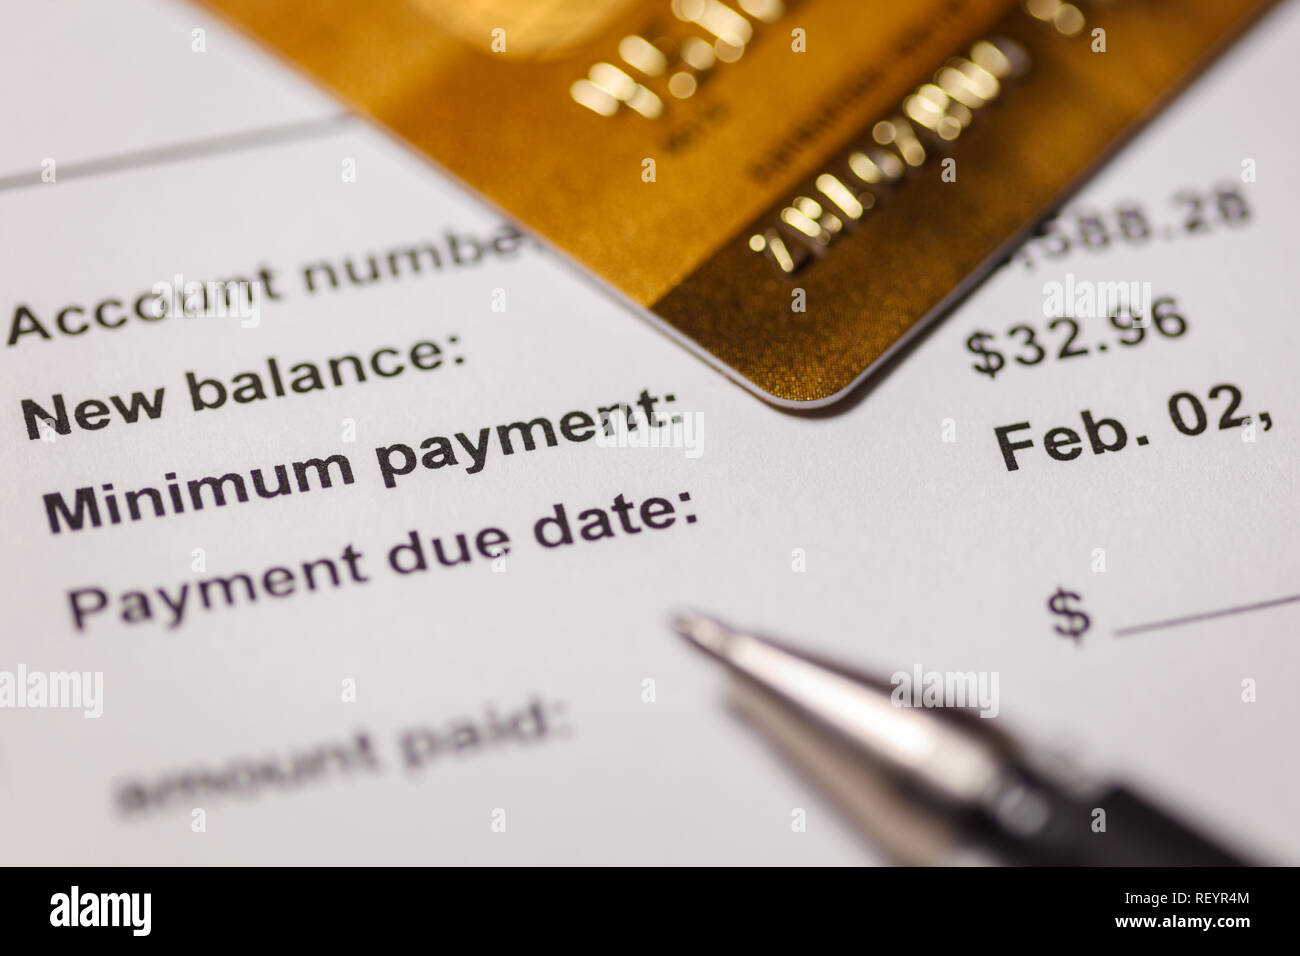 Paying the credit card bill,  minimum payment. Stock Photo